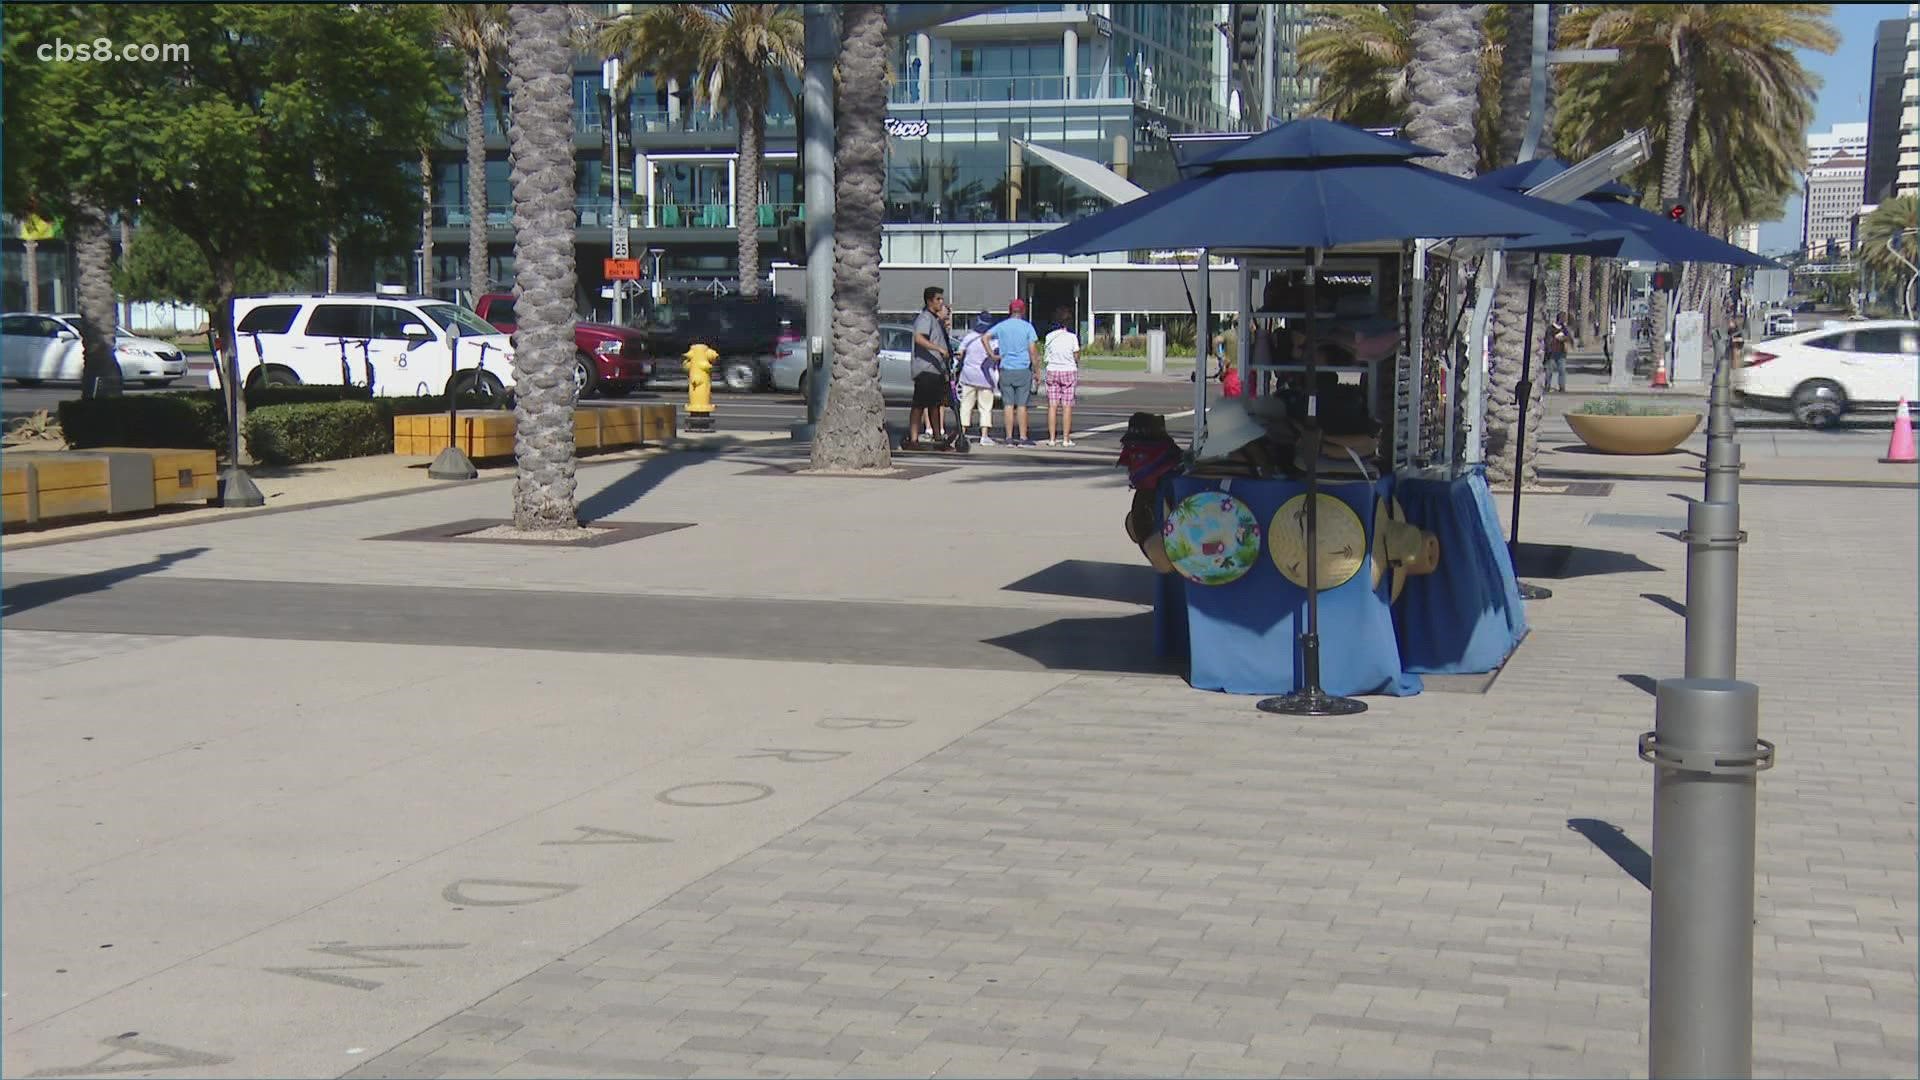 It would affect what are primarily unlicensed sales at beach boardwalks, Balboa Park and near downtown.